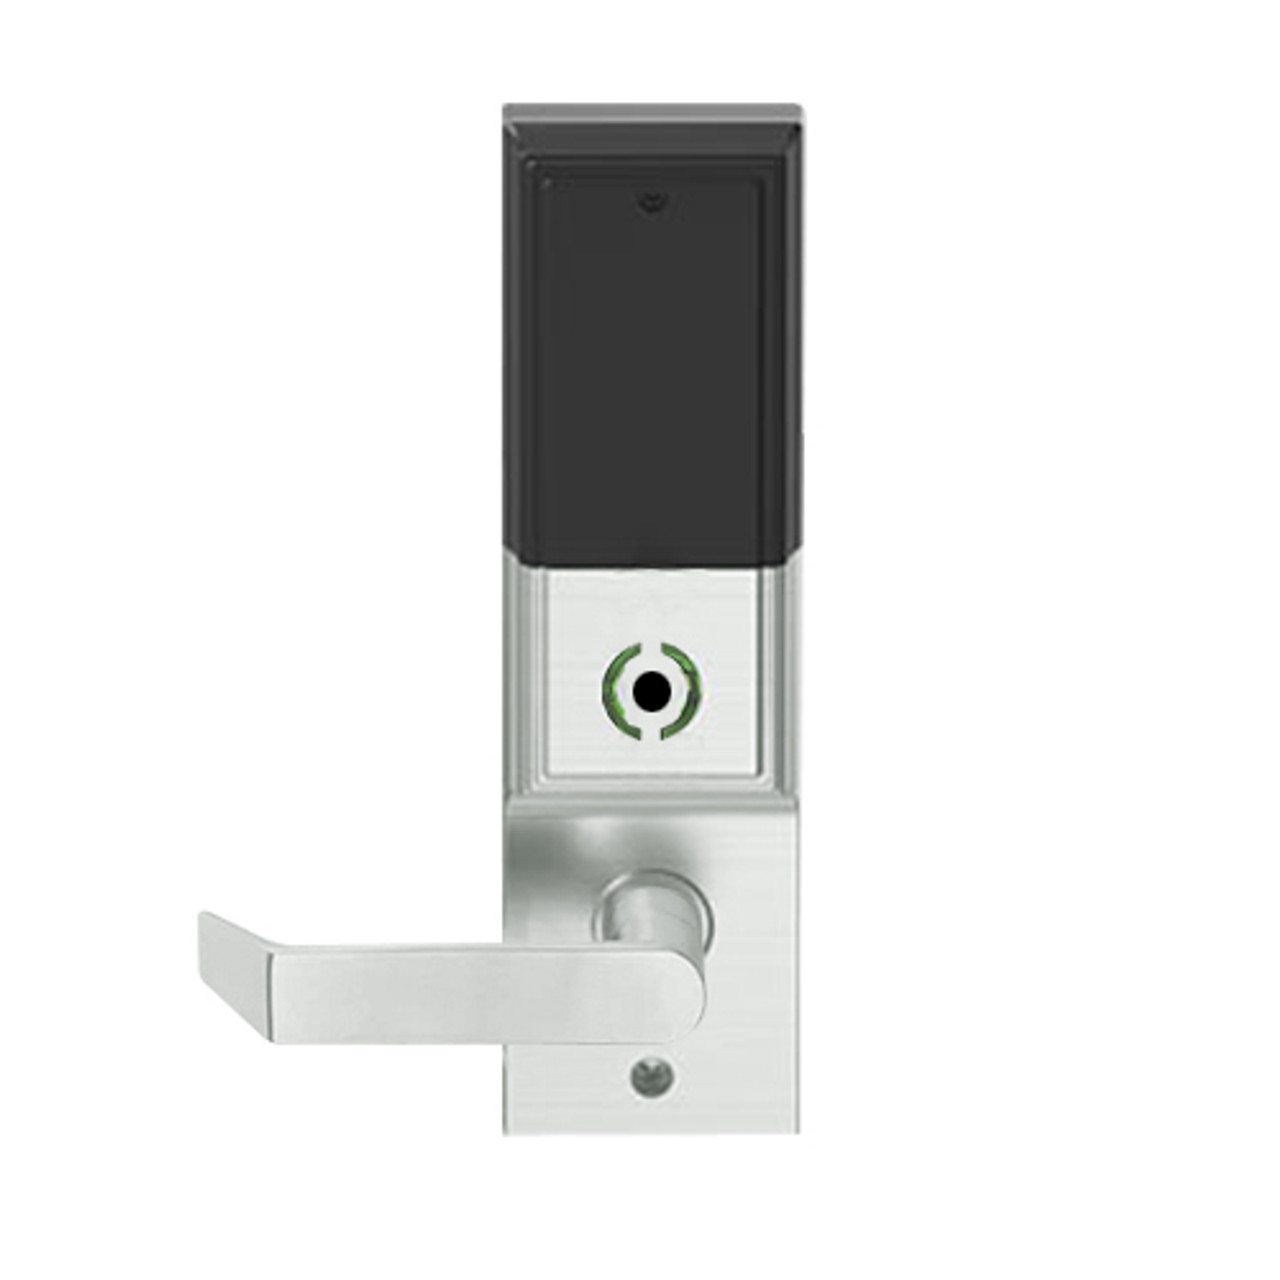 LEMS-ADD-J-06-619 Schlage Storeroom Wireless Addison Mortise Lock with LED and Rhodes Lever Prepped for FSIC in Satin Nickel